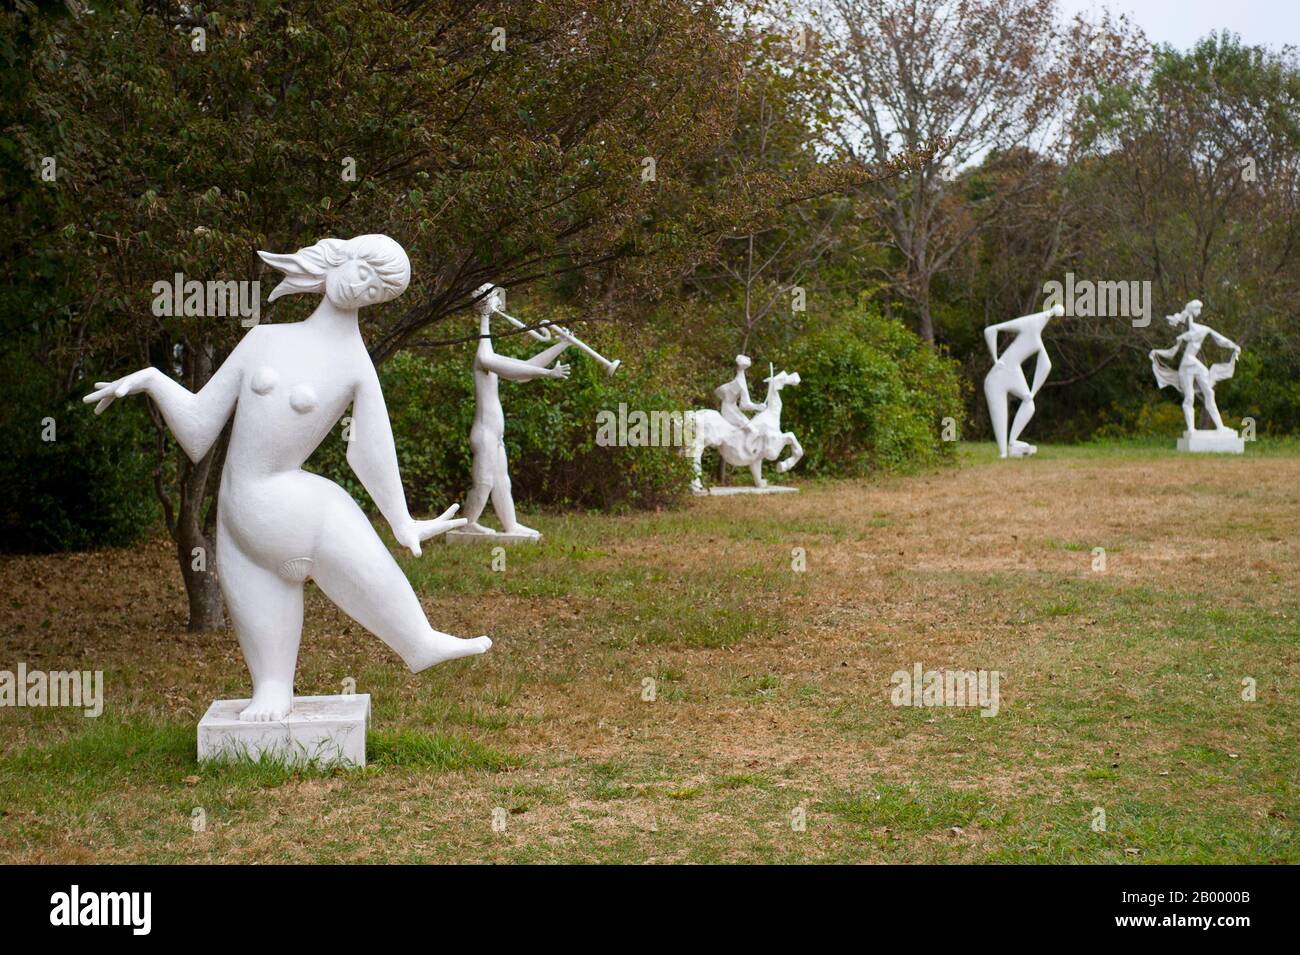 Statues in an outdoor art exhibit at the Field Gallery in West Tisbury on Martha’s Vineyard, Massachusetts, USA. Stock Photo